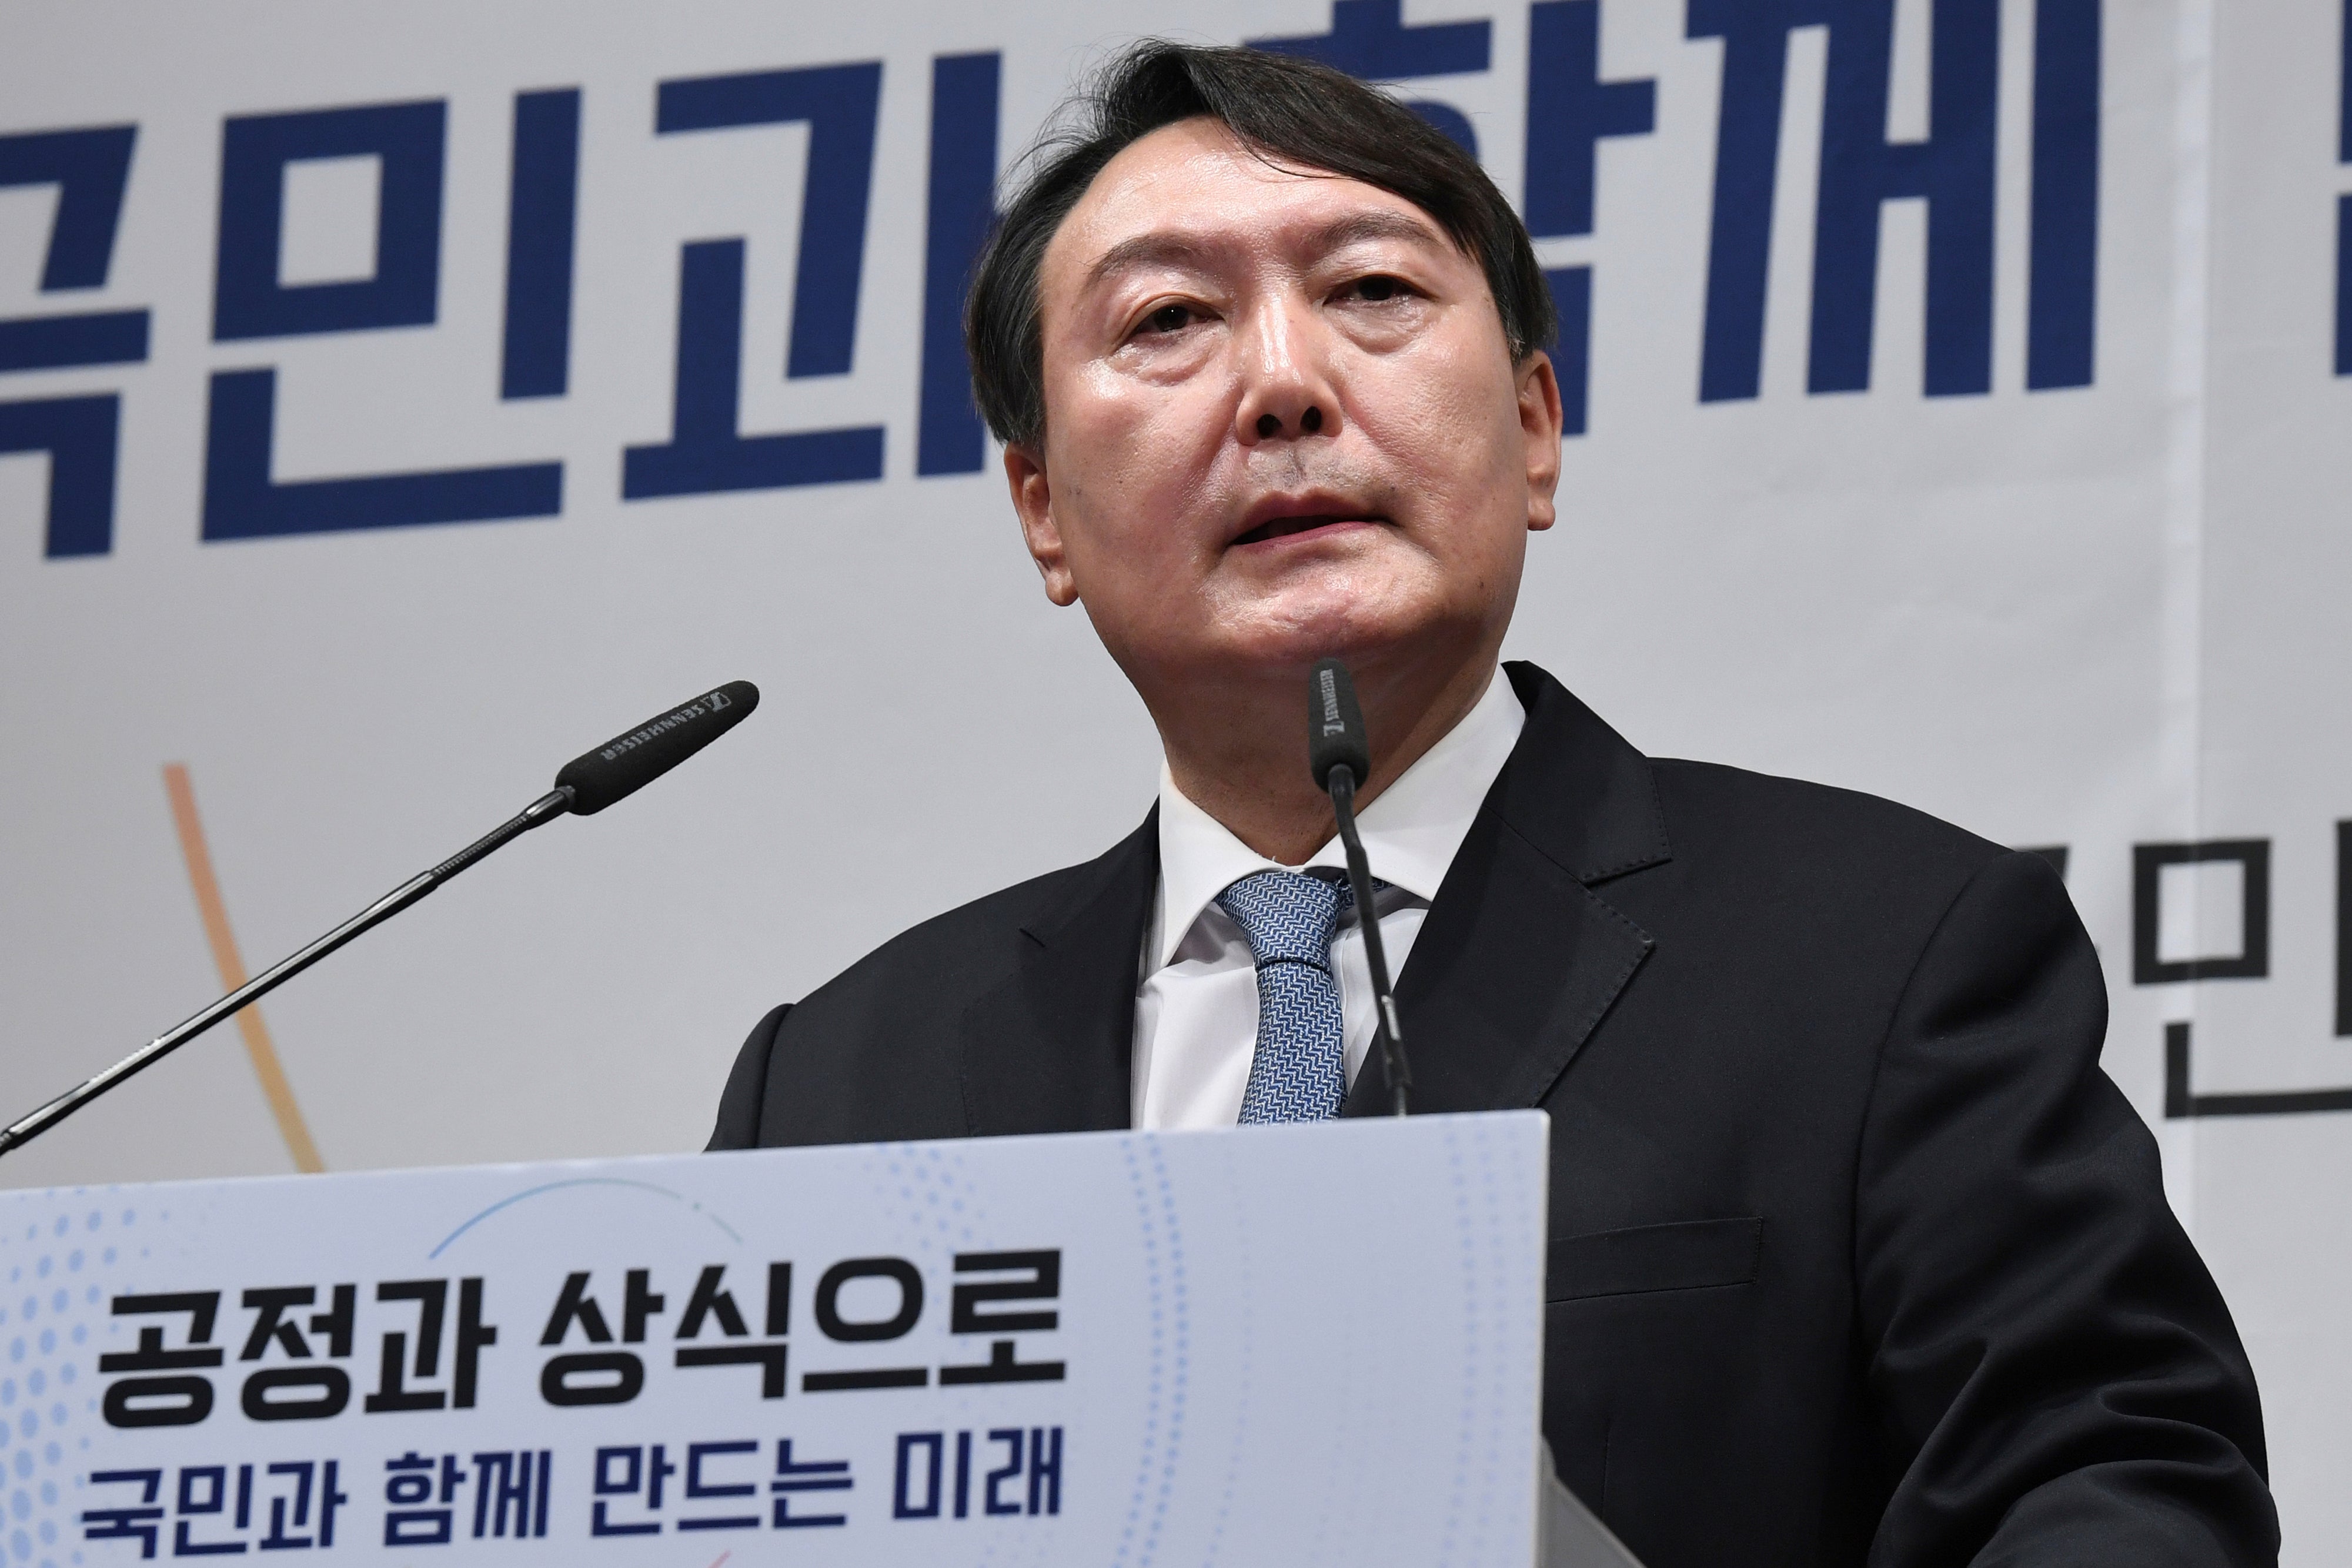 Yoon Suk Yeol speaks to declare his bid for presidency for next year’s election